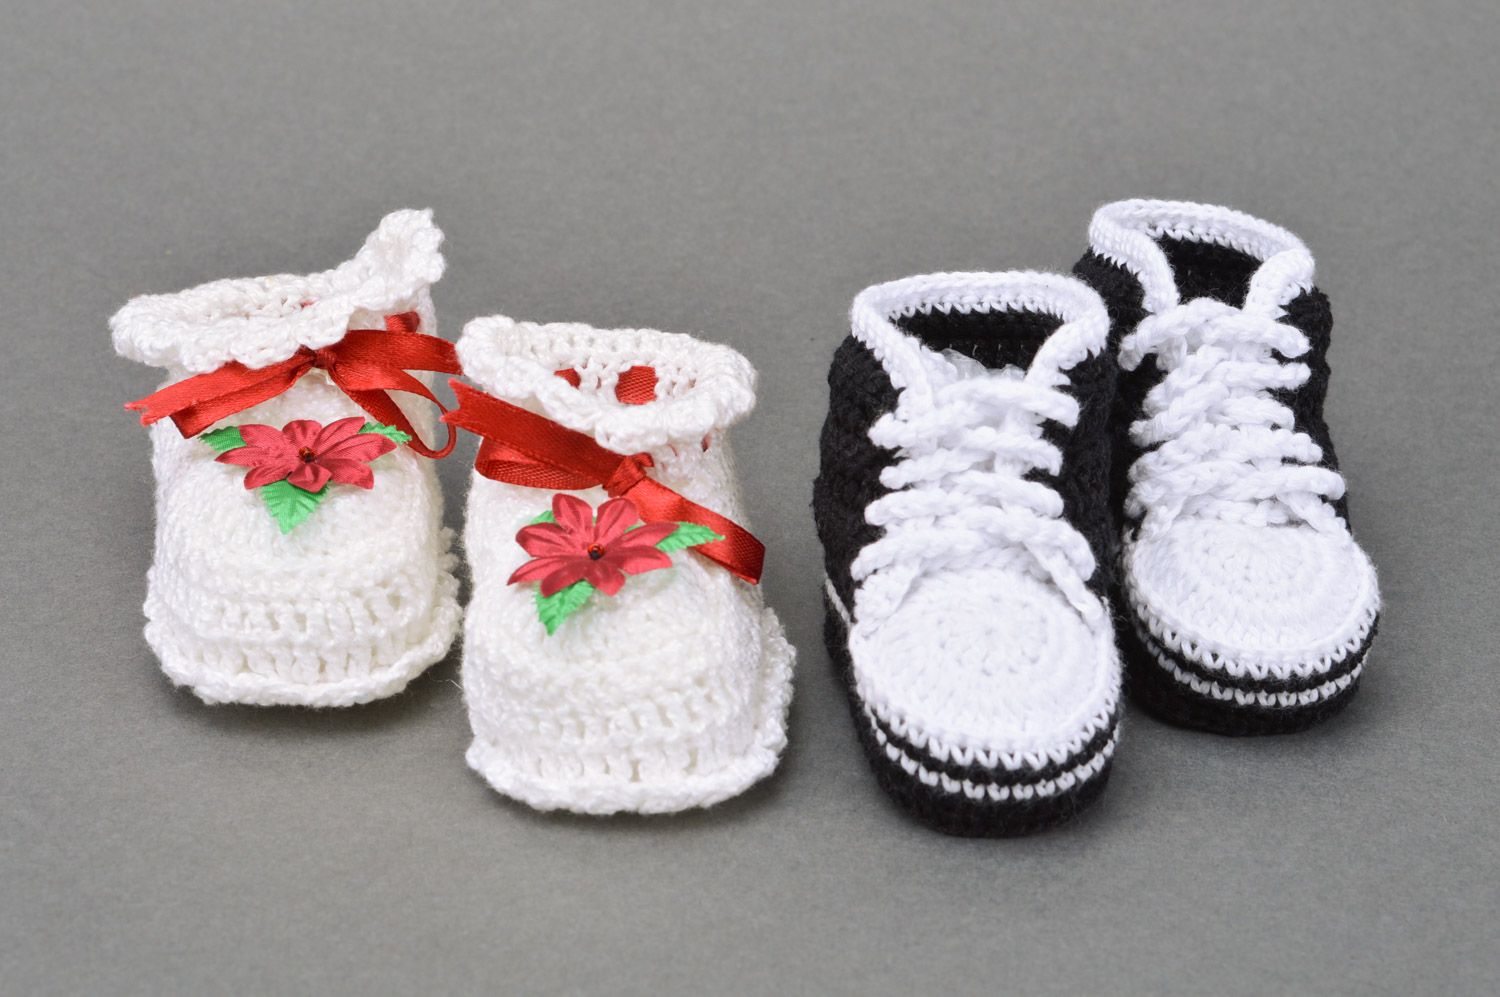 Handmade crocheted set of baby booties for boy and girl made of natural cotton photo 2